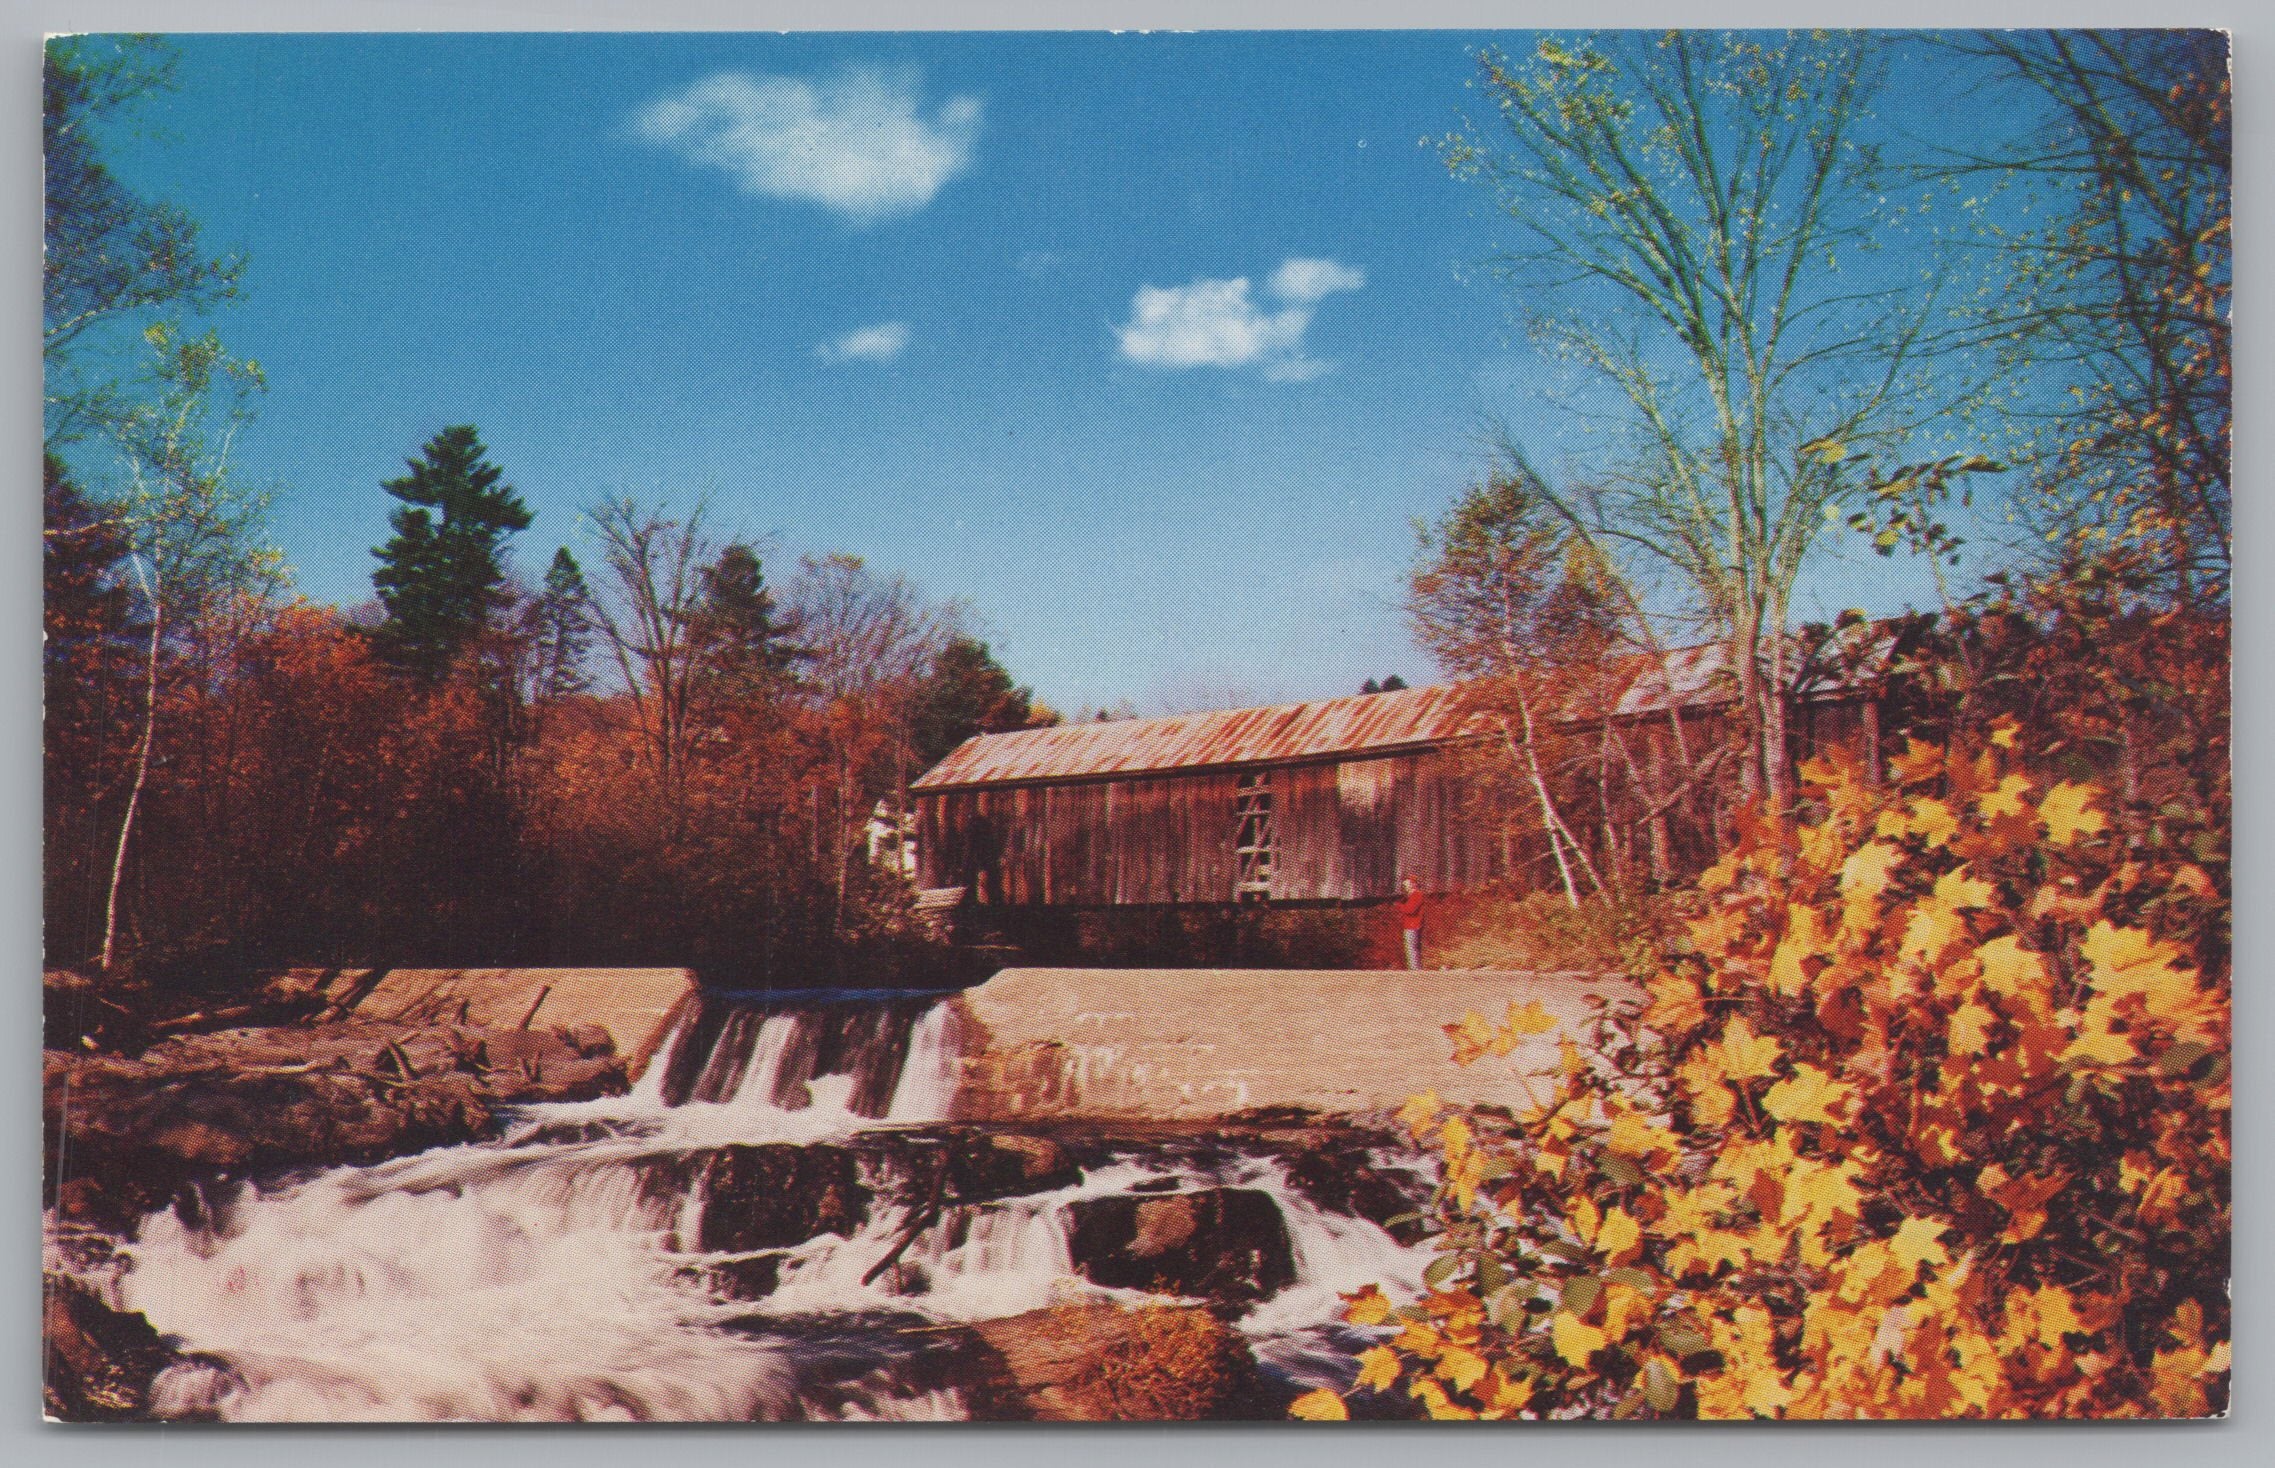 A Covered Bridge At Thetford Vermont, USA, Vintage Post Card.